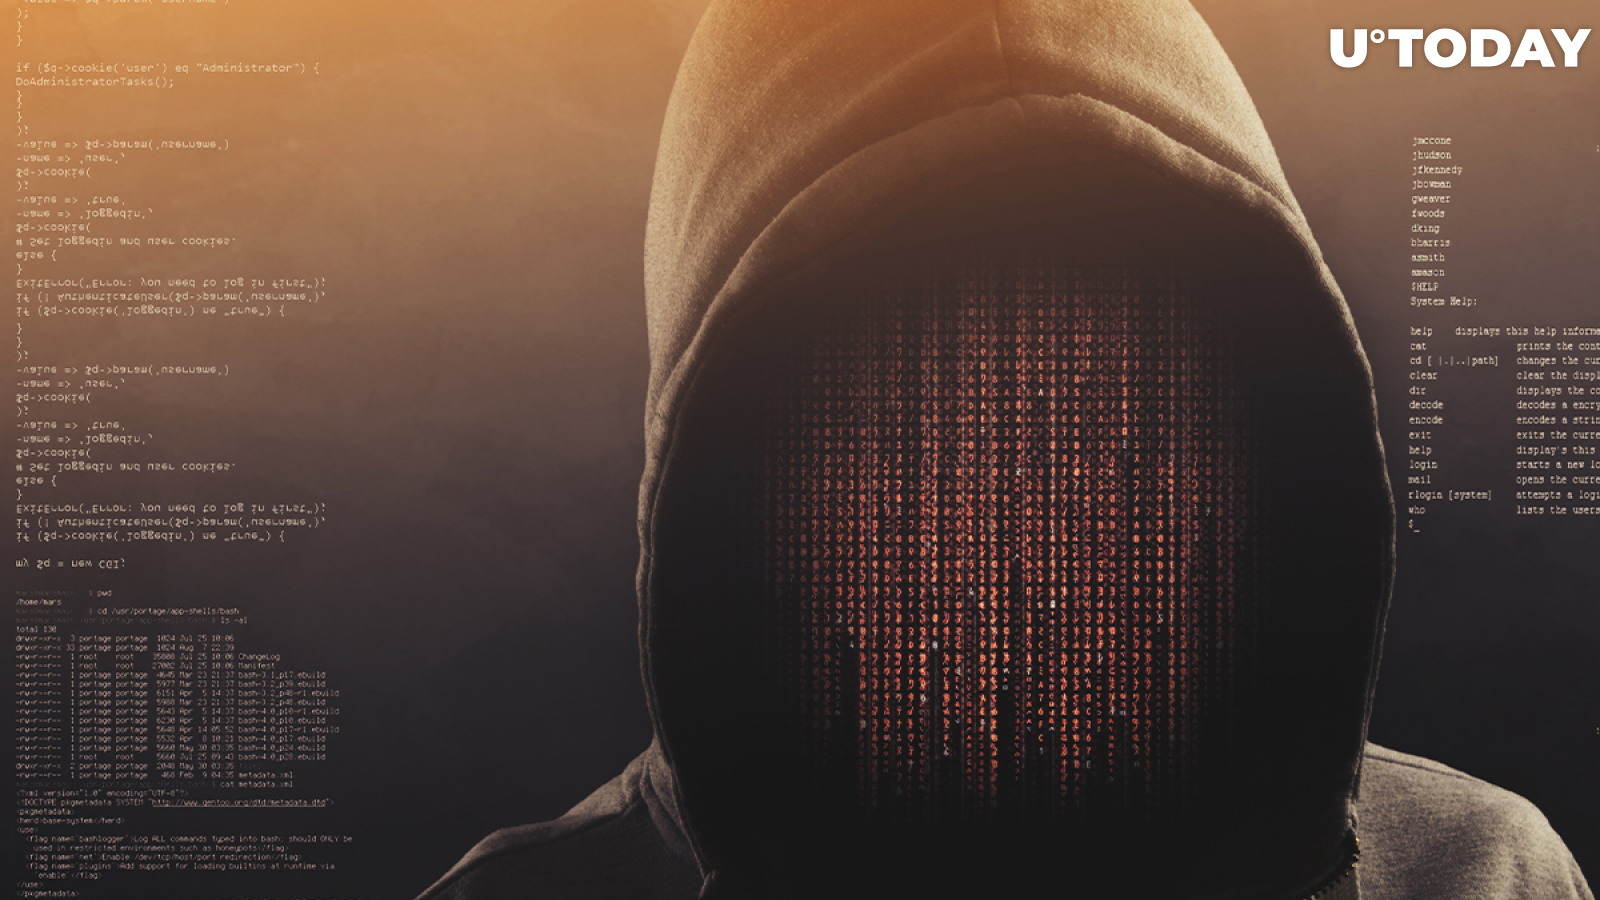 $611 Million DeFi Heist Hacker Failed to Contact Poly, Named Another Term to Return Funds